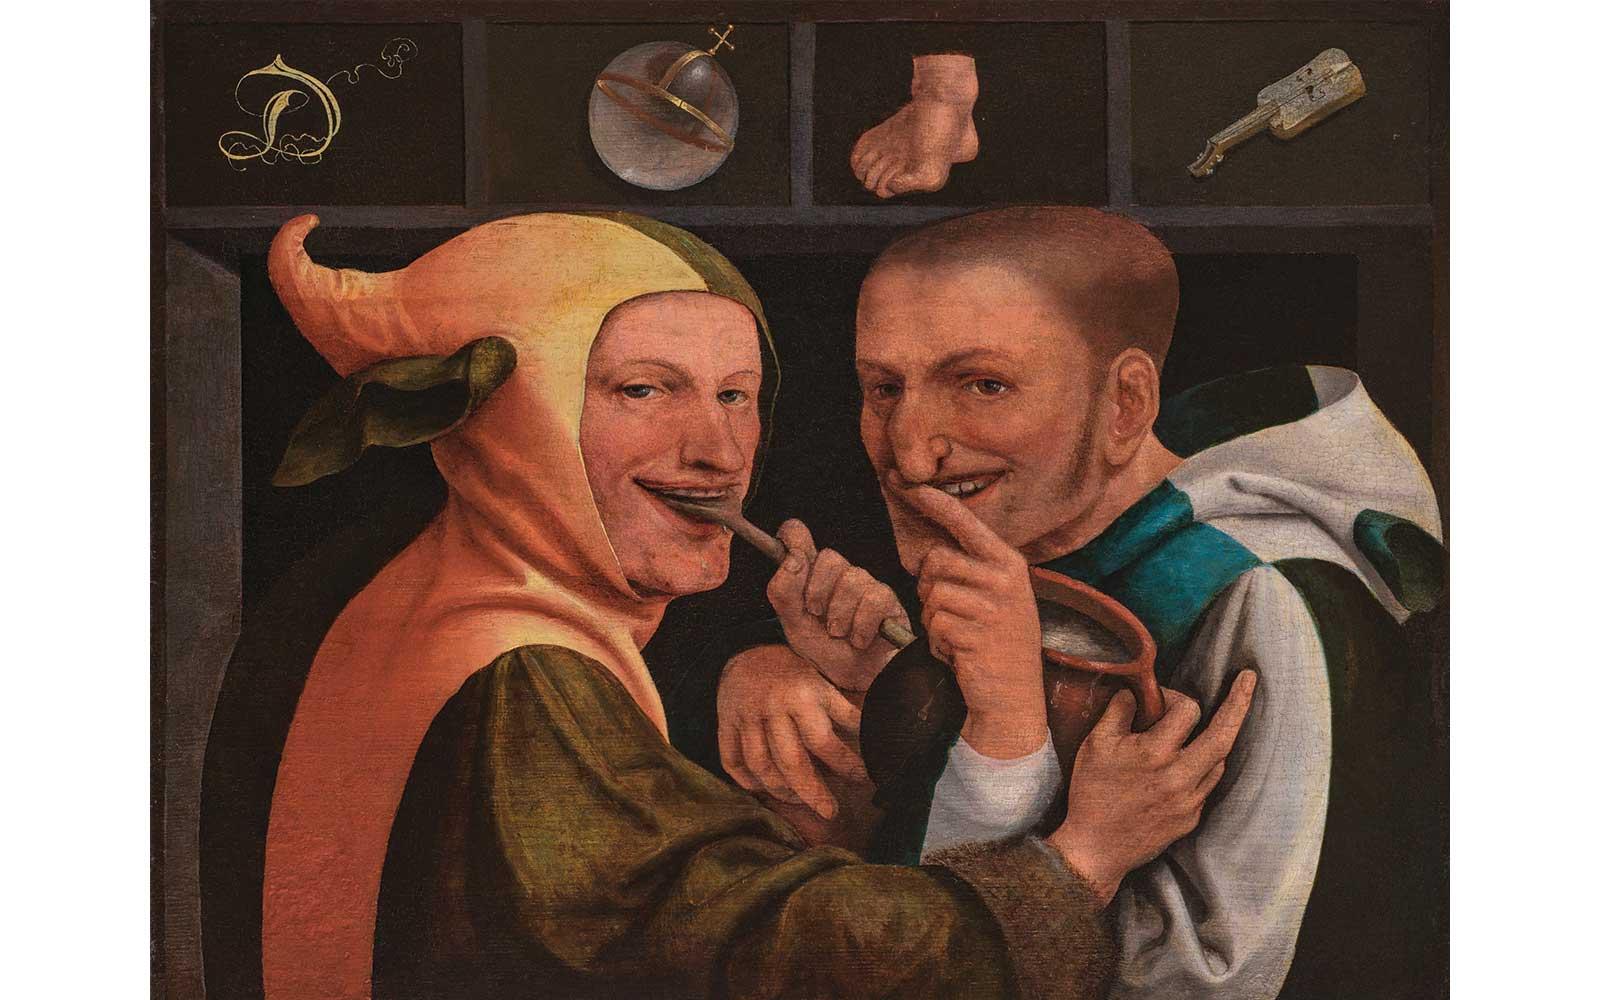 Jan Massys, Rebus: The World Feeds Many Fools, about 1530.